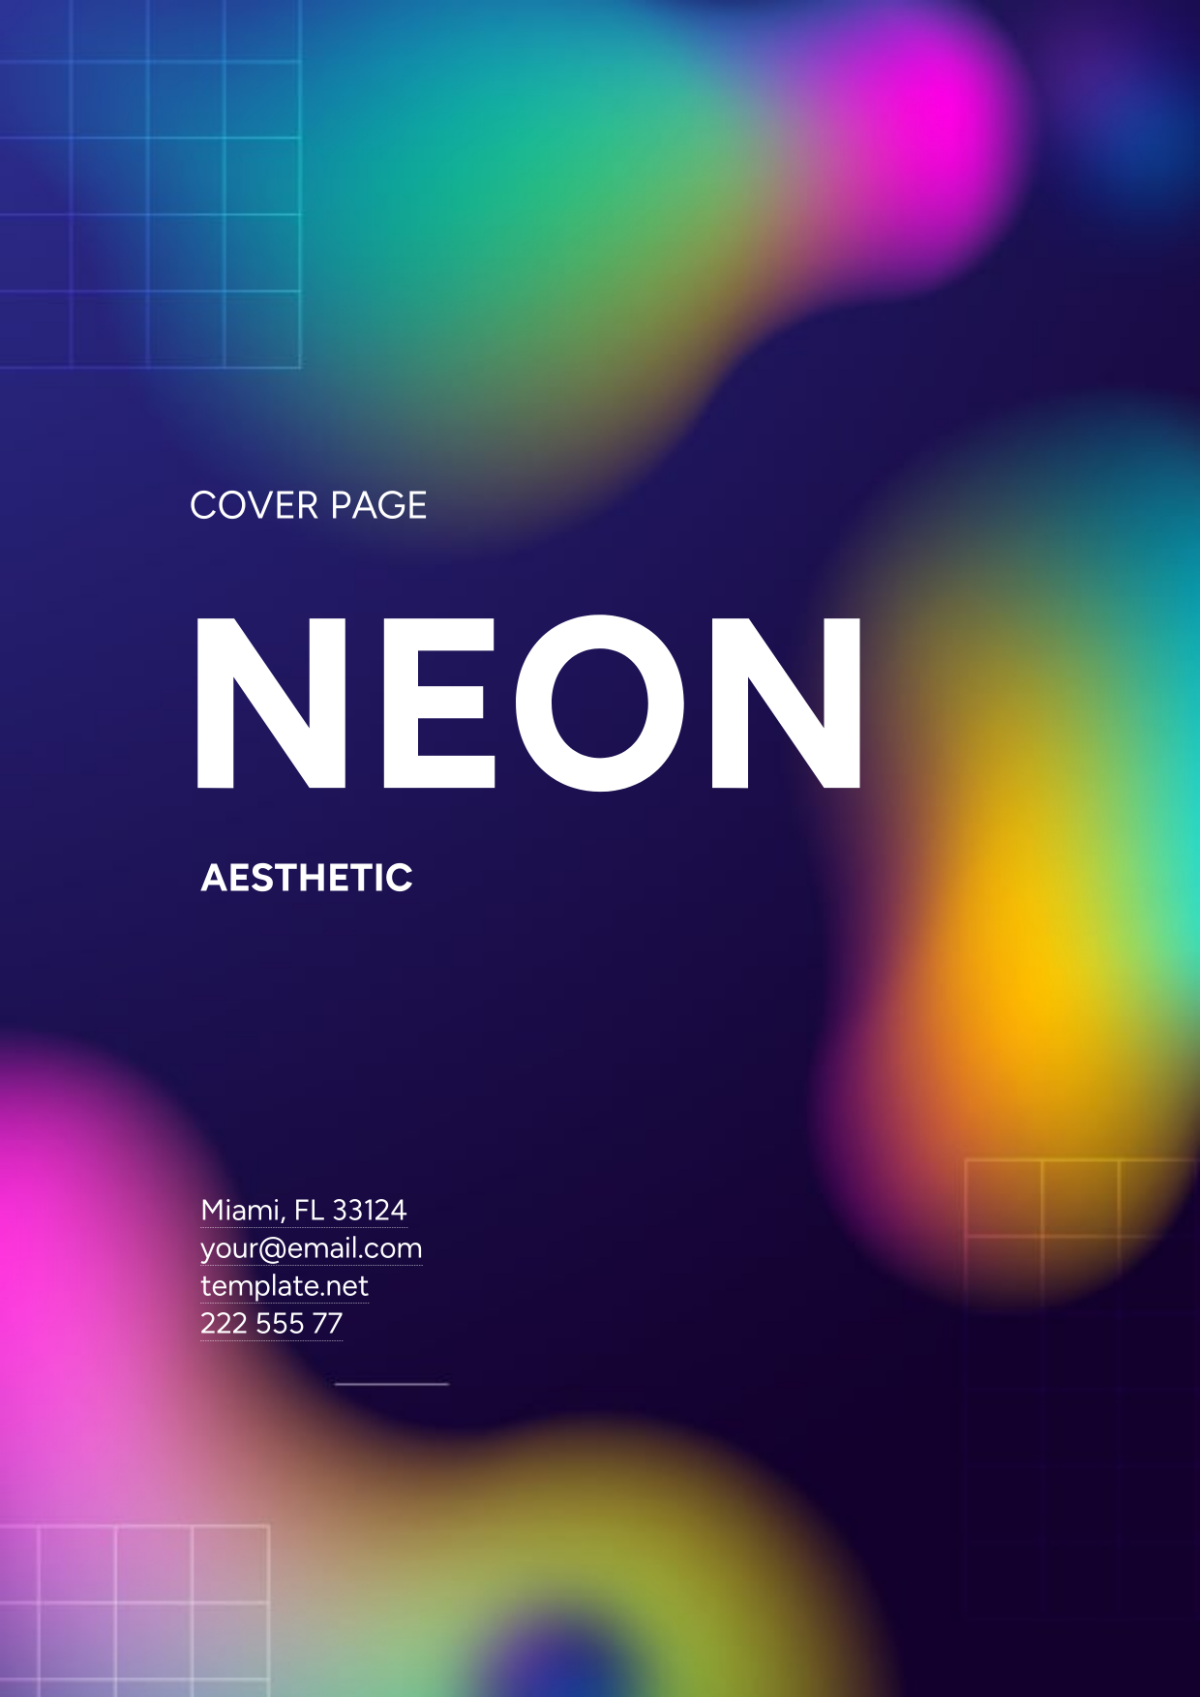 Neon Aesthetic Cover Page